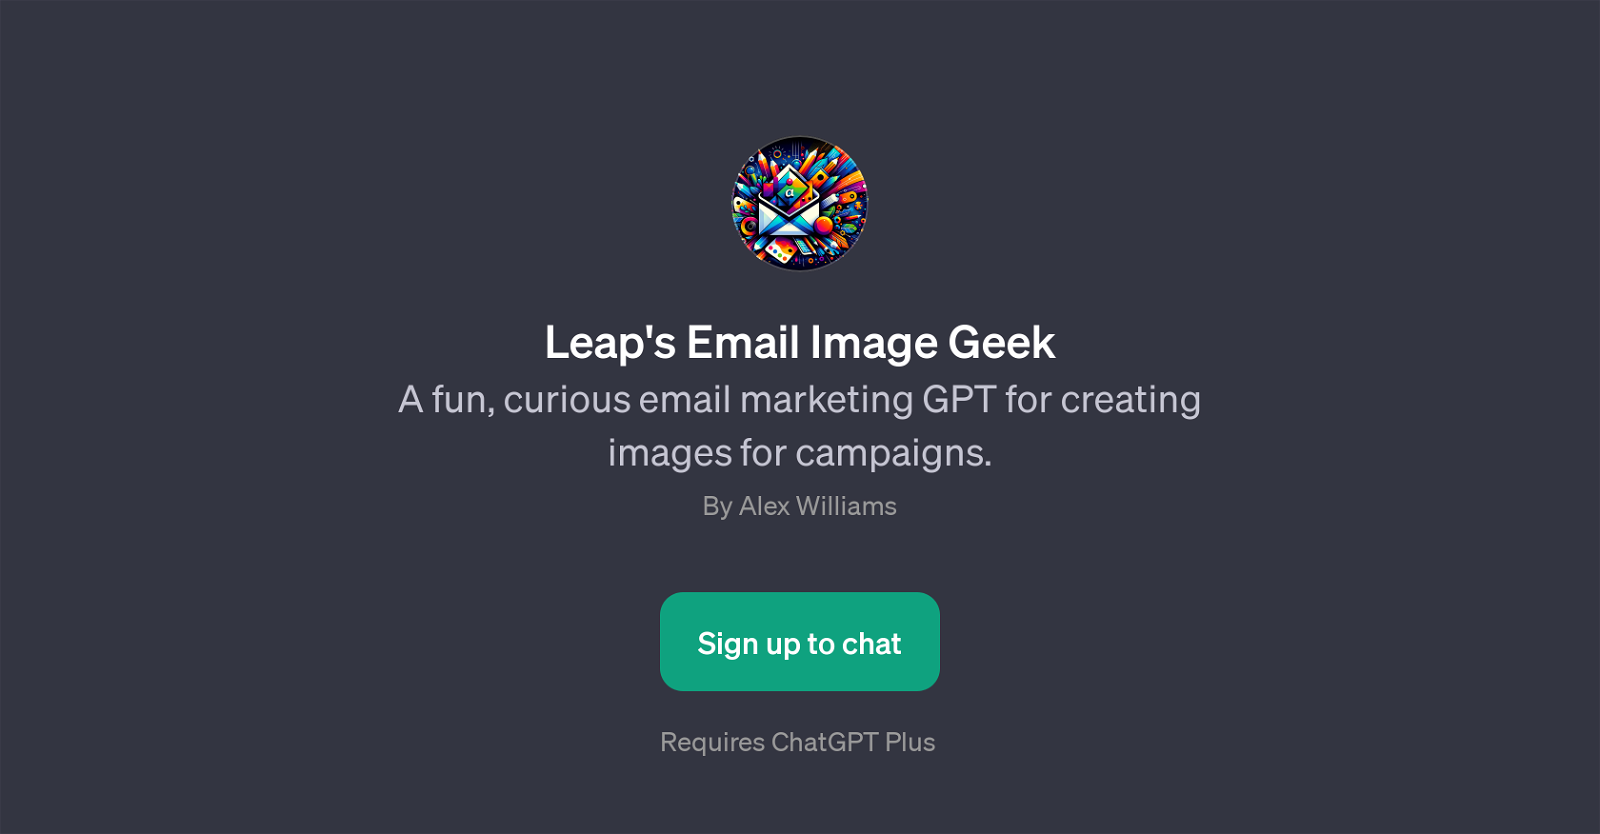 Leap's Email Image Geek website